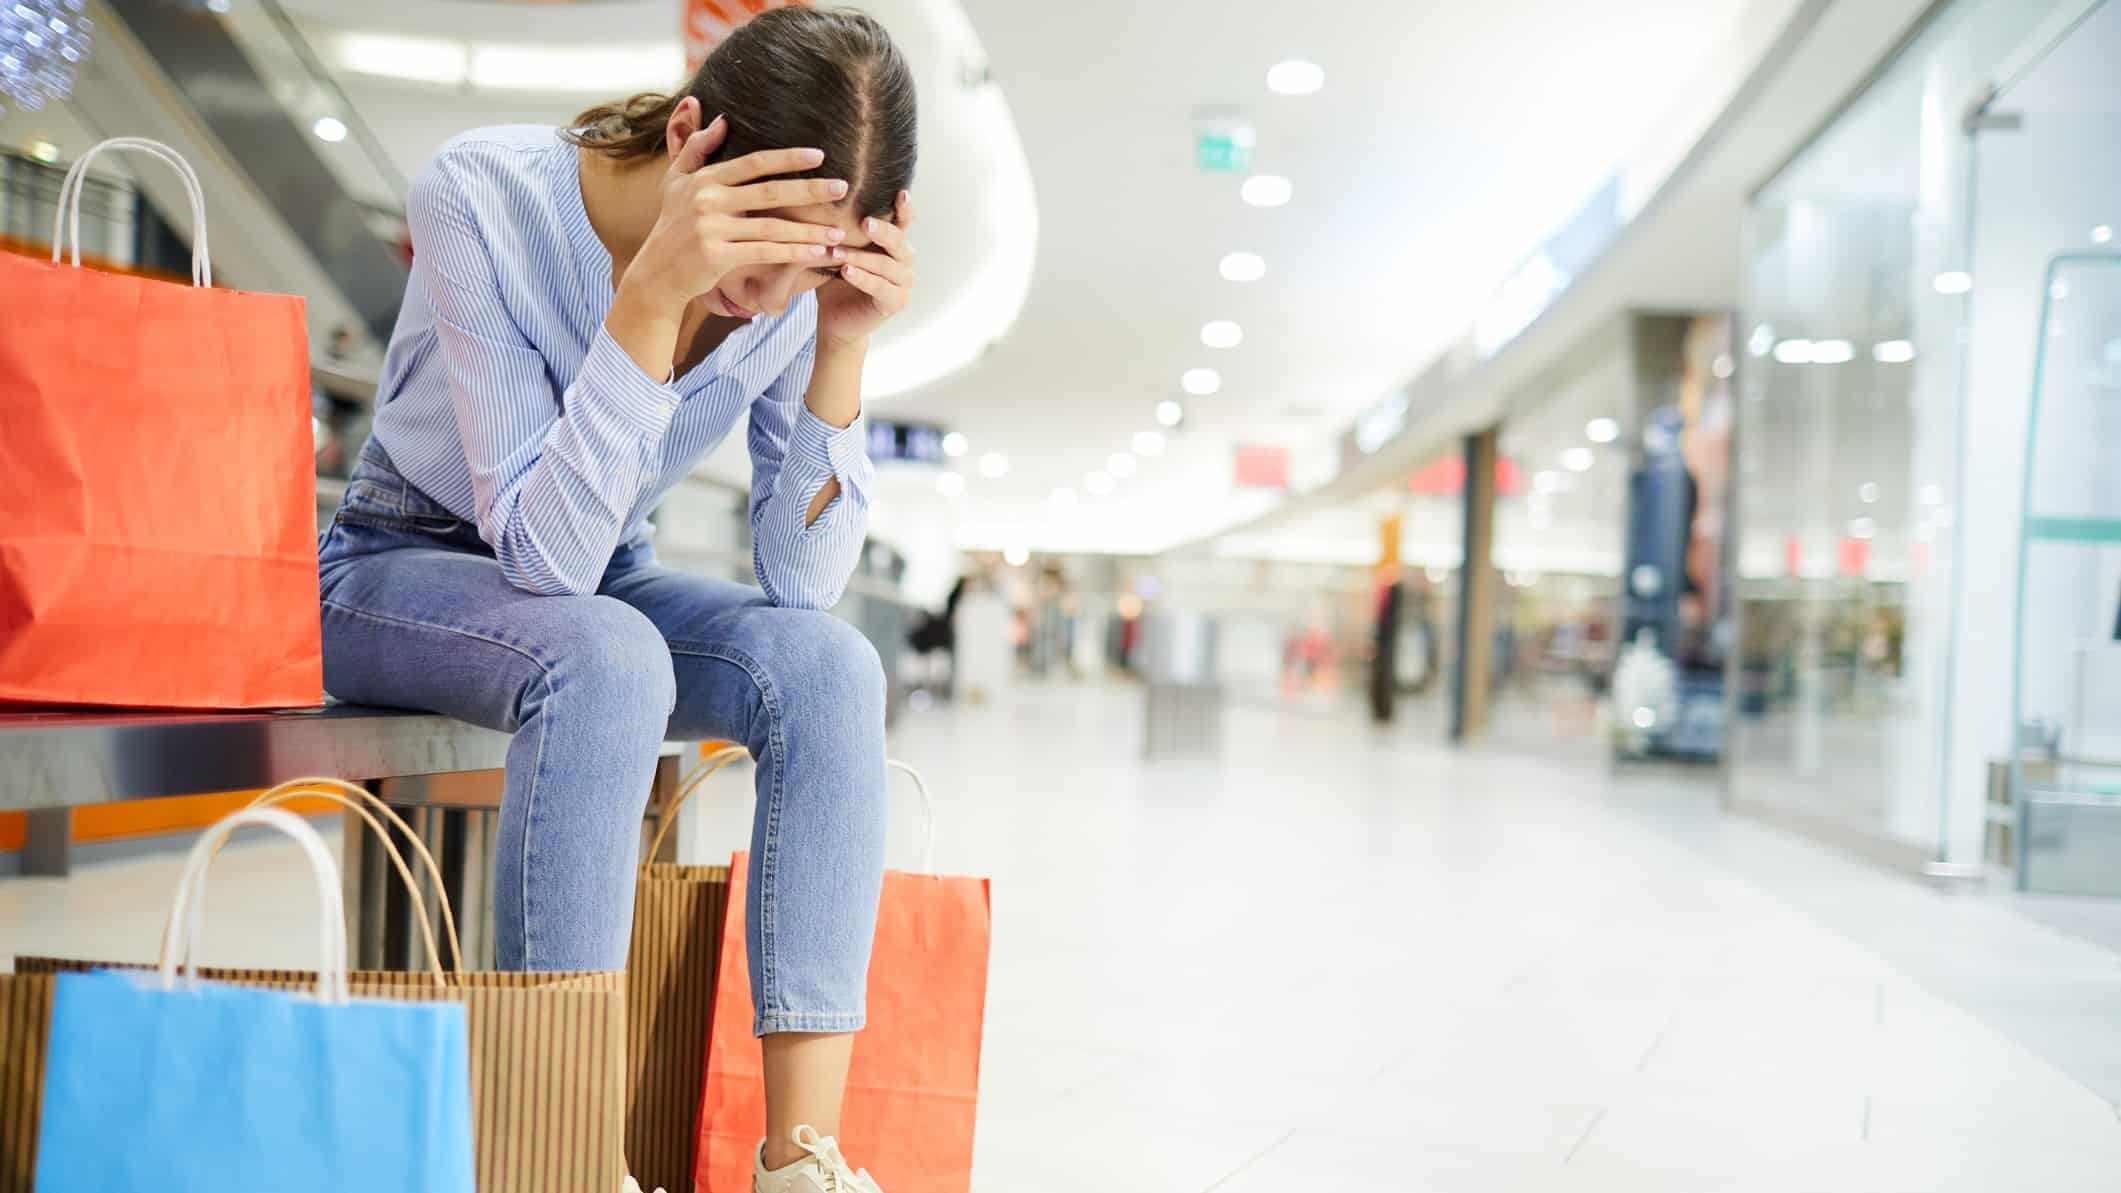 Falling ASX retail share price represented by sad shopper sitting in mall.